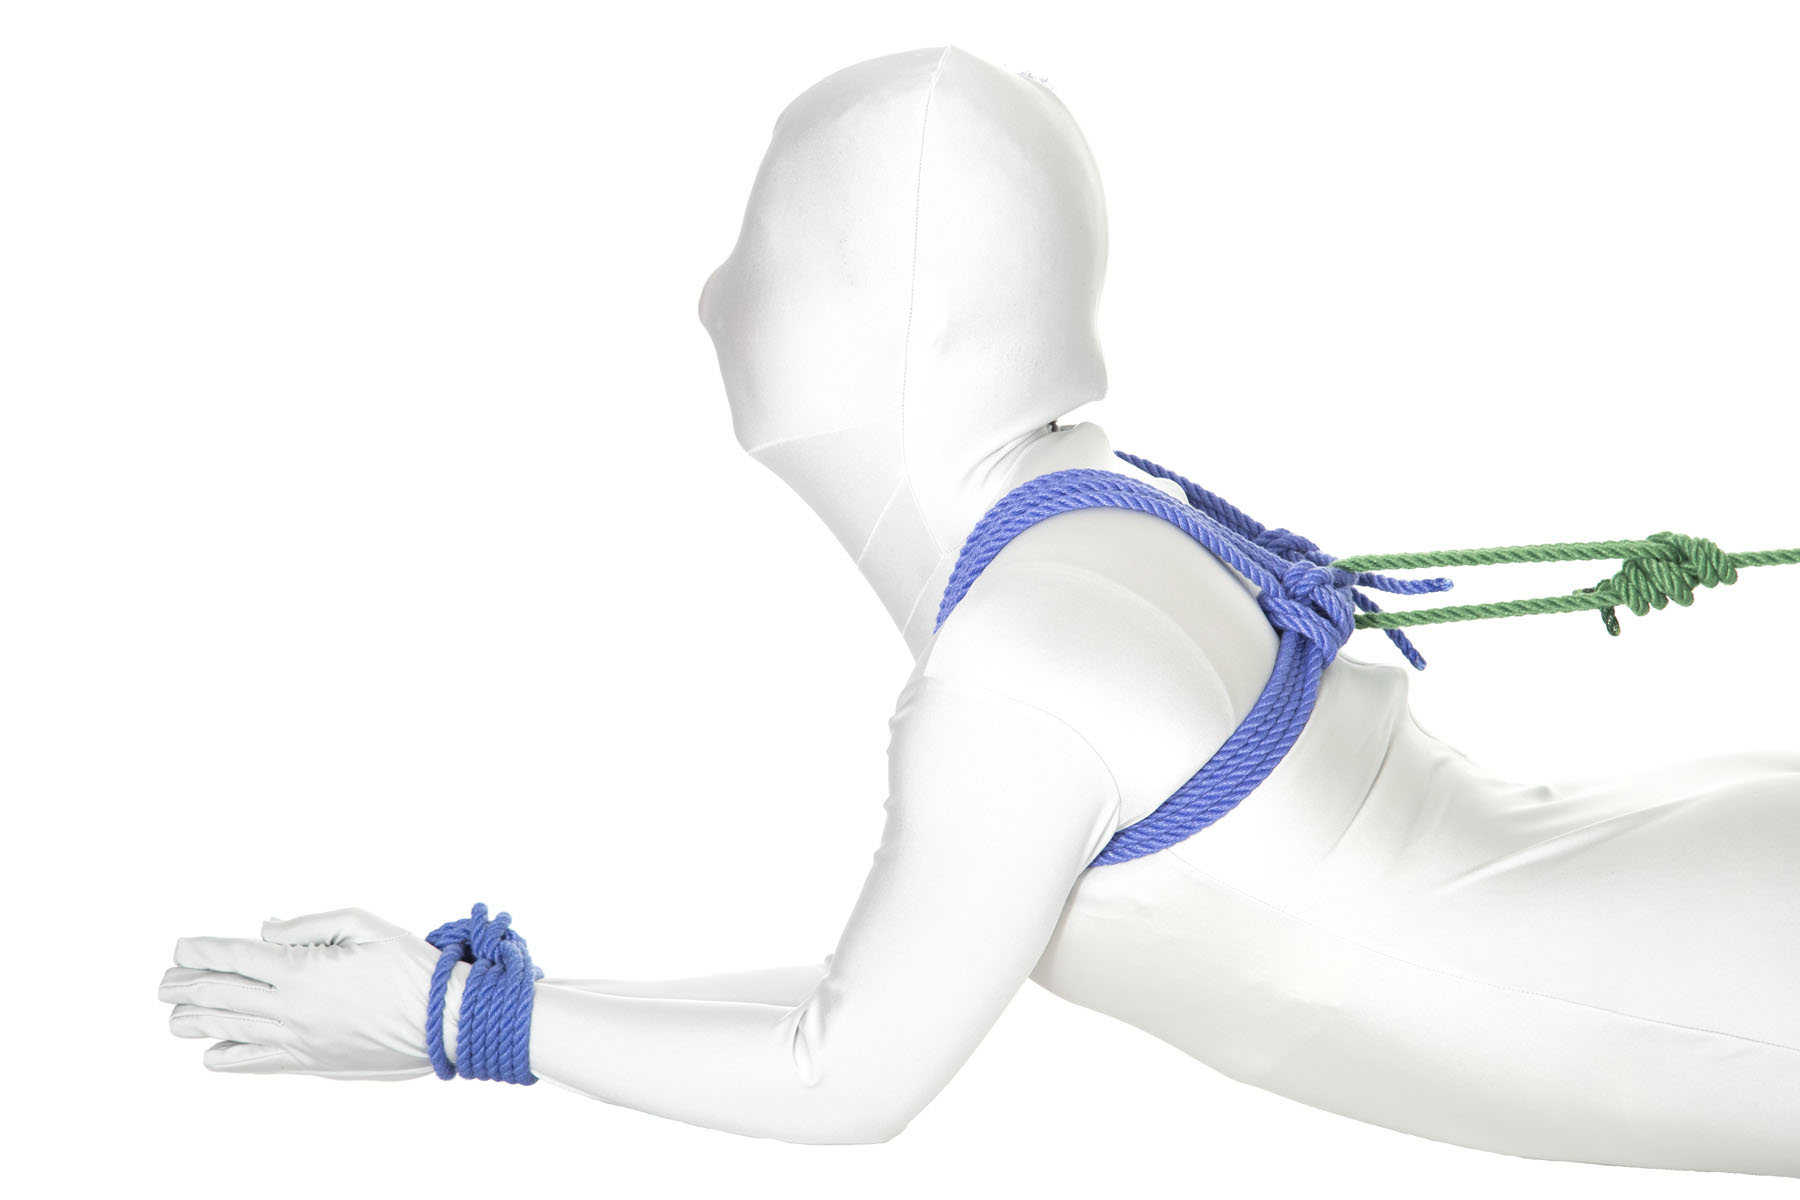 This image shows an adaptation for the hogtie for people who aren’t comfortable with their hands behind their back. The person in the image has their arms in front of them, with the elbows bent and the forearms resting flat on the floor. The wrists are tied together with a column tie.